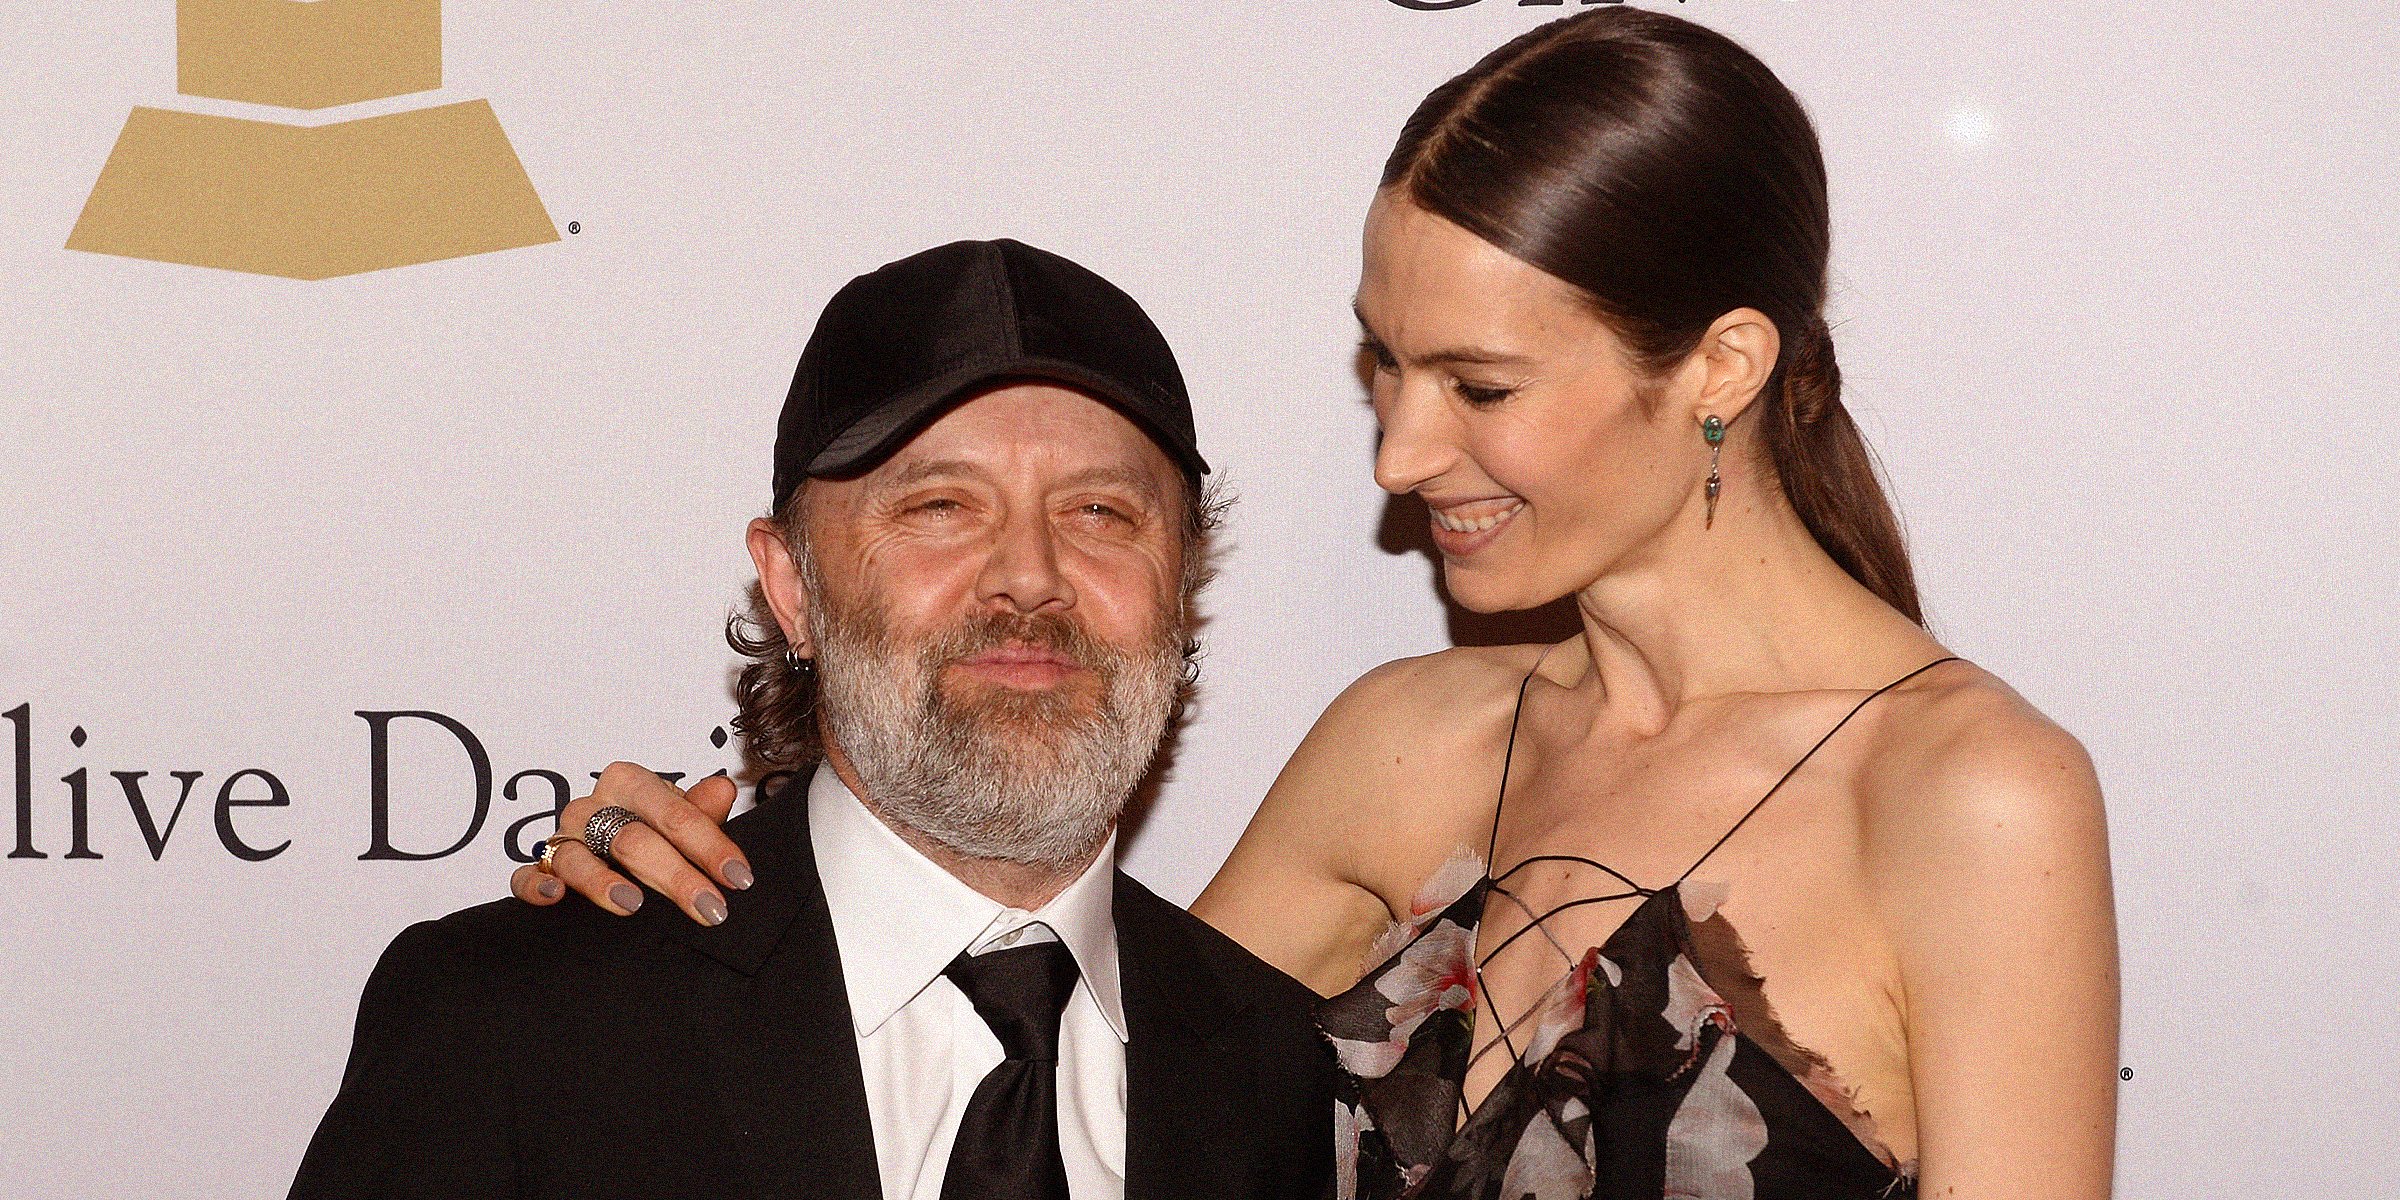 Lars Ulrich and His Wife Jessica Miller | Source: Getty Images